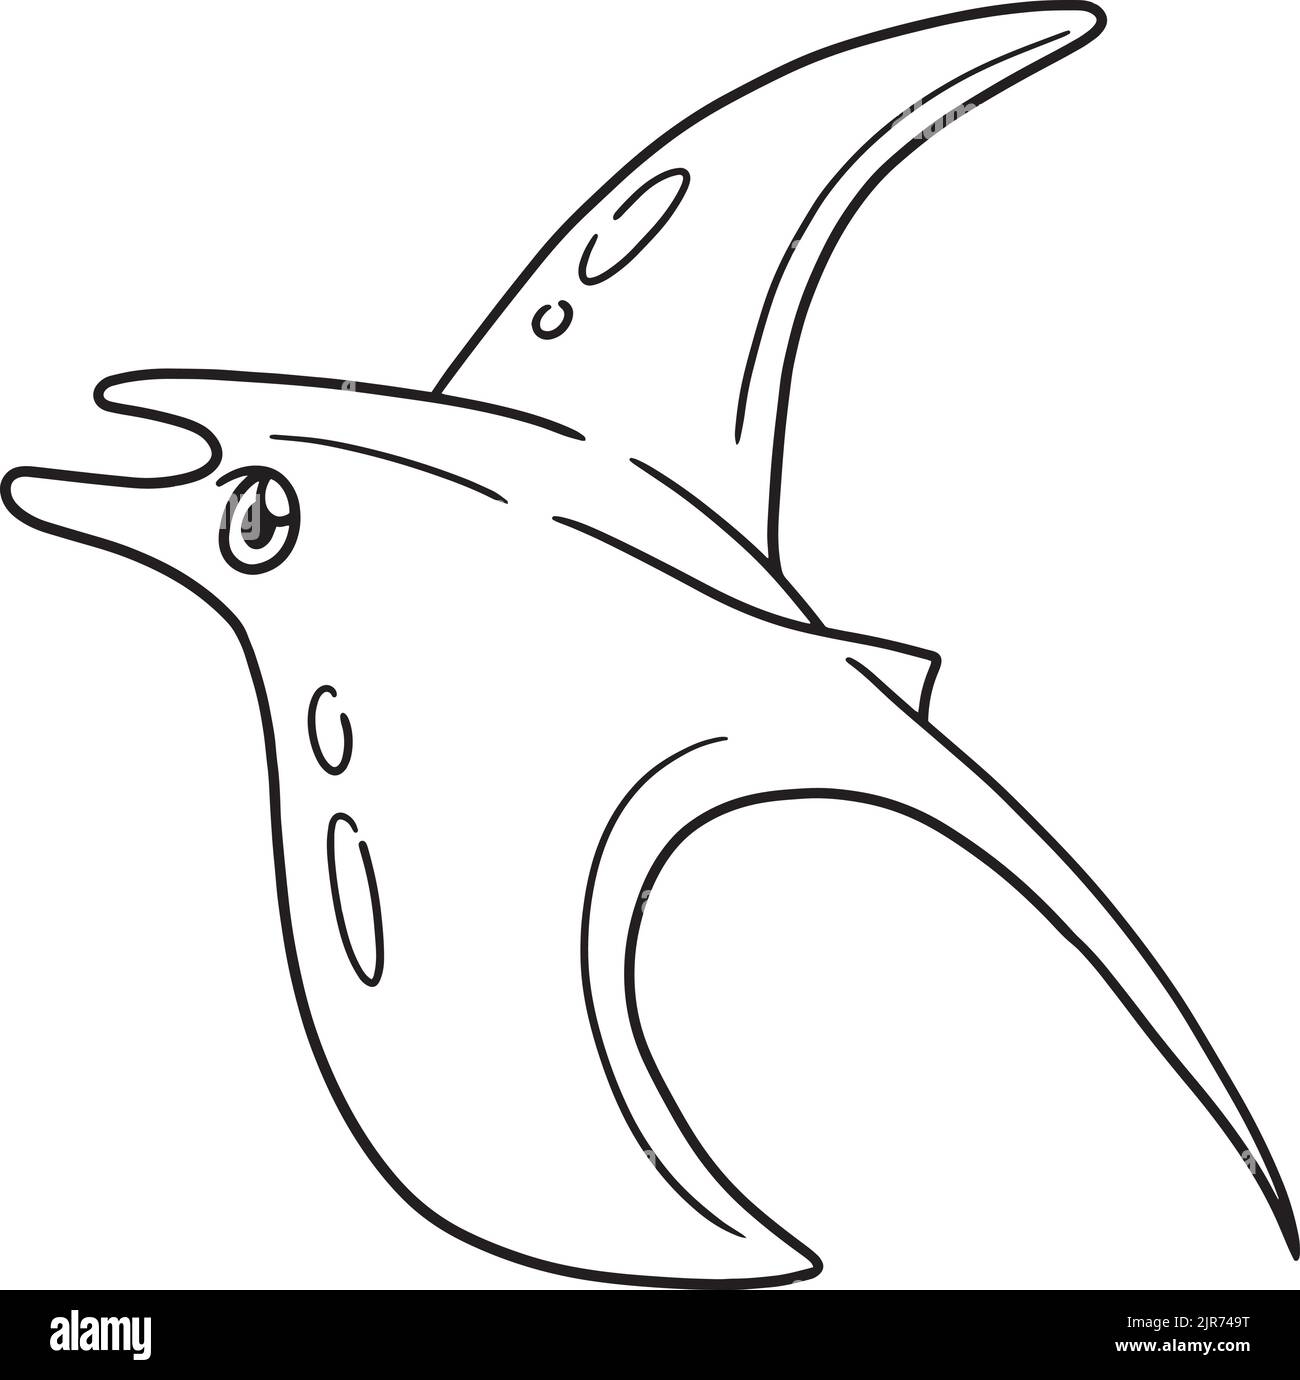 Manta Ray Isolated Coloring Page for Kids Stock Vector